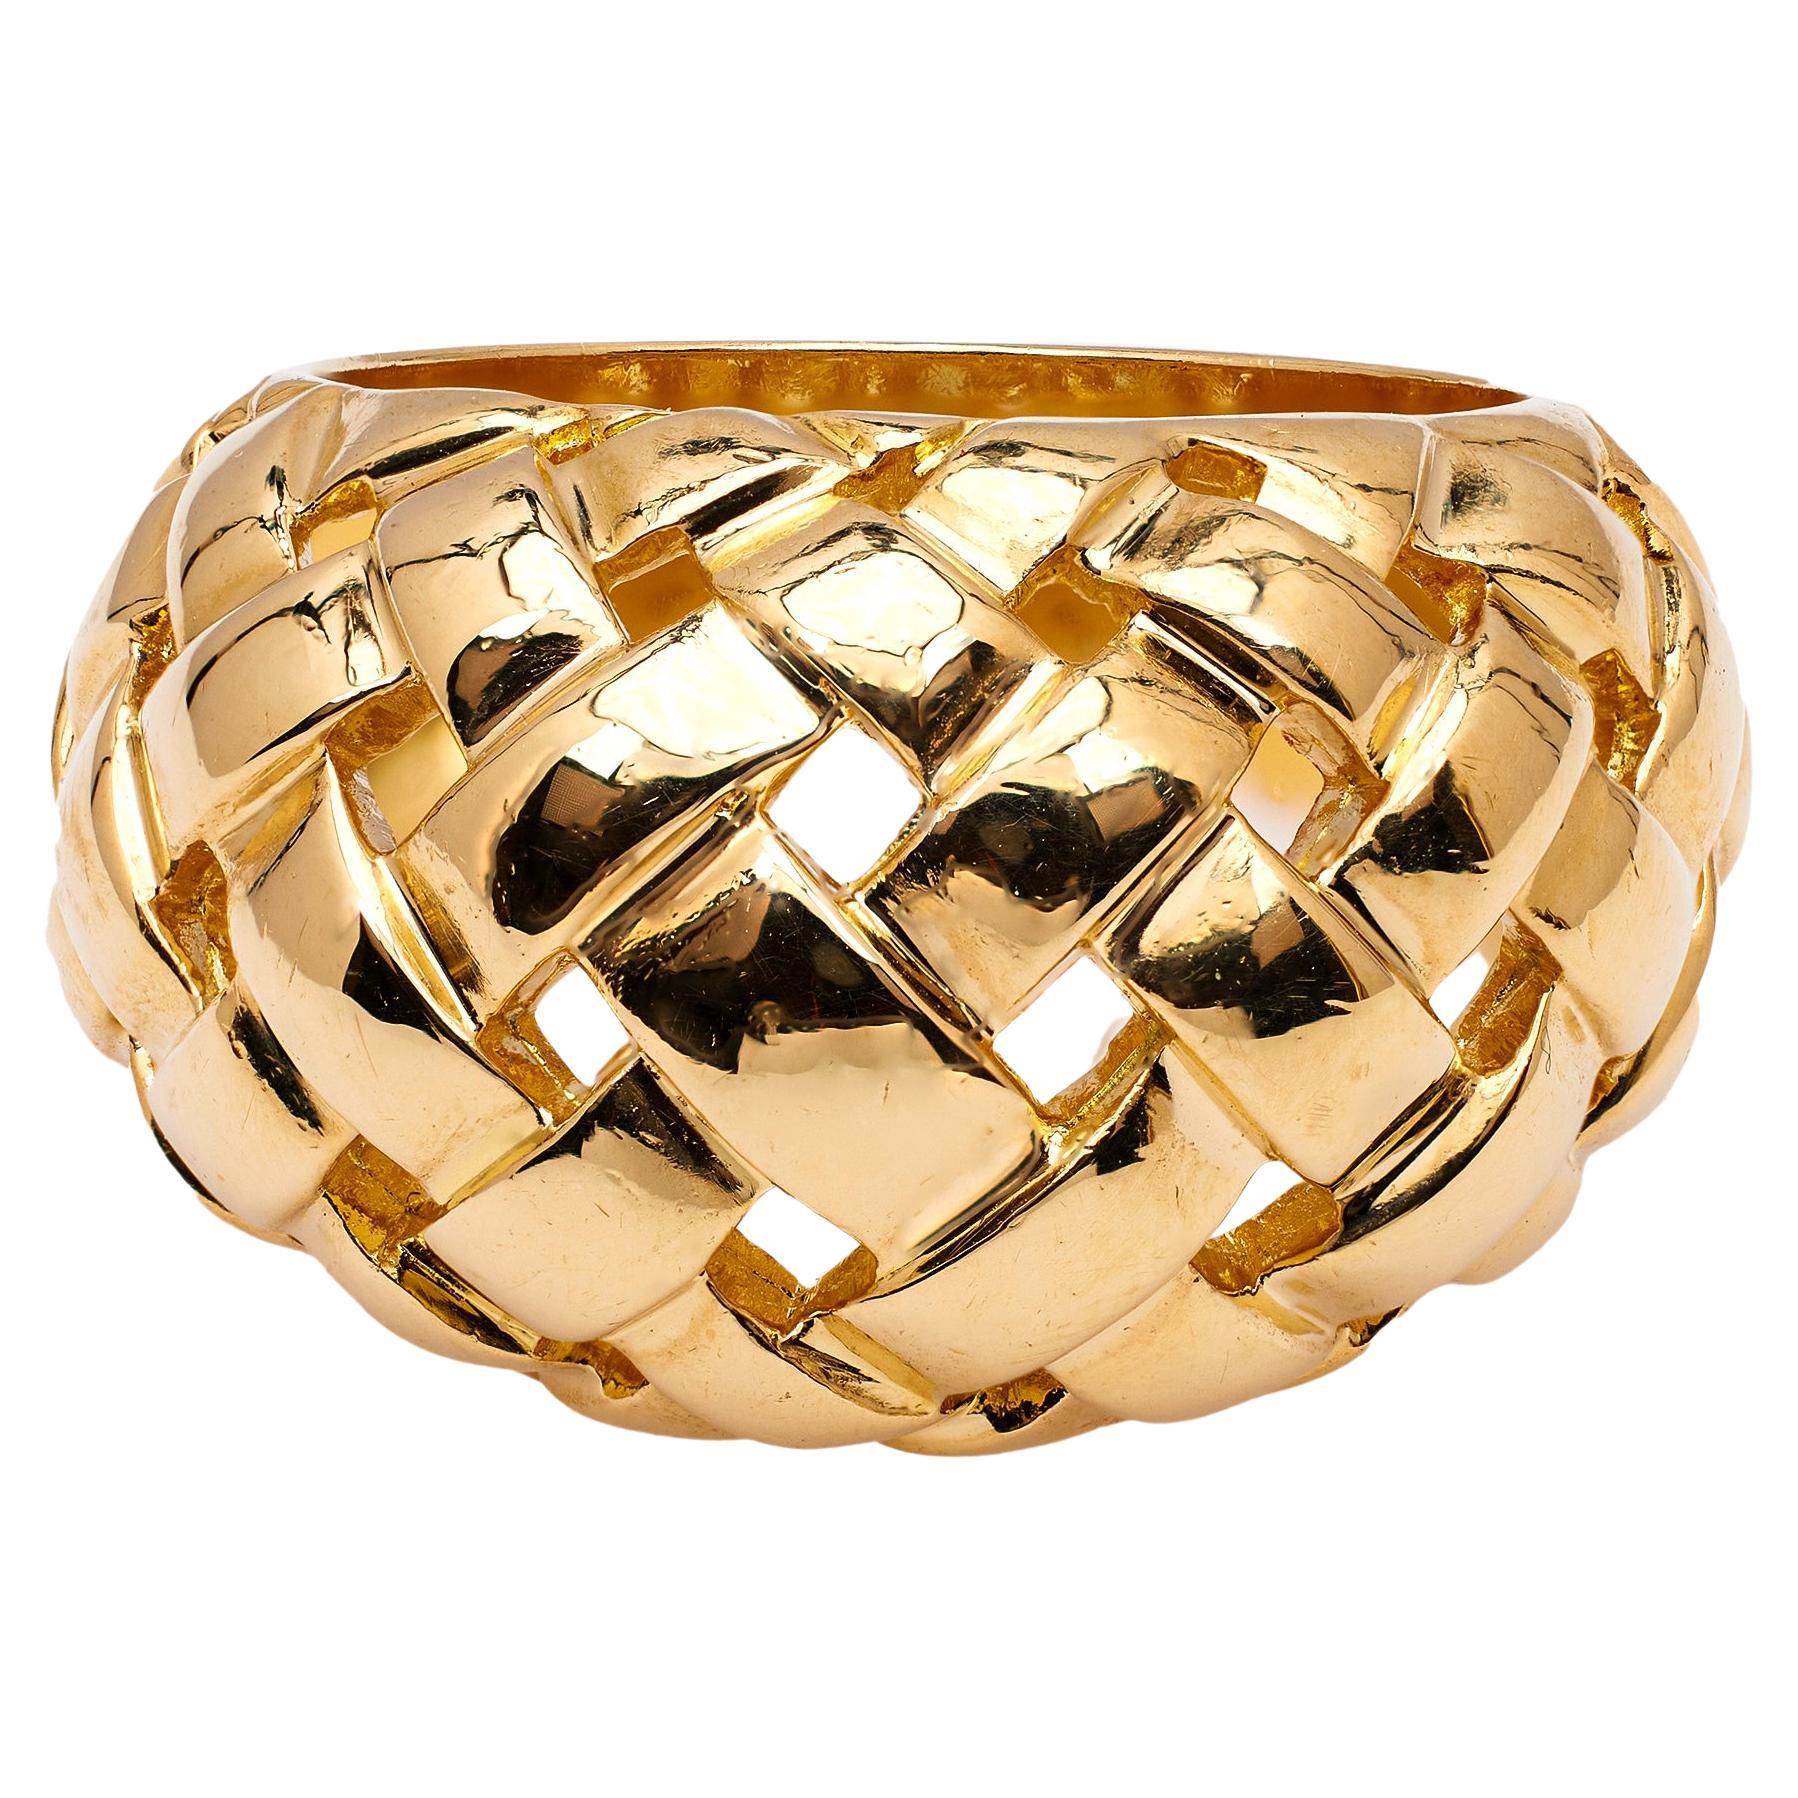 Vintage Tiffany & Co. 18k Yellow Gold Woven Dome Ring